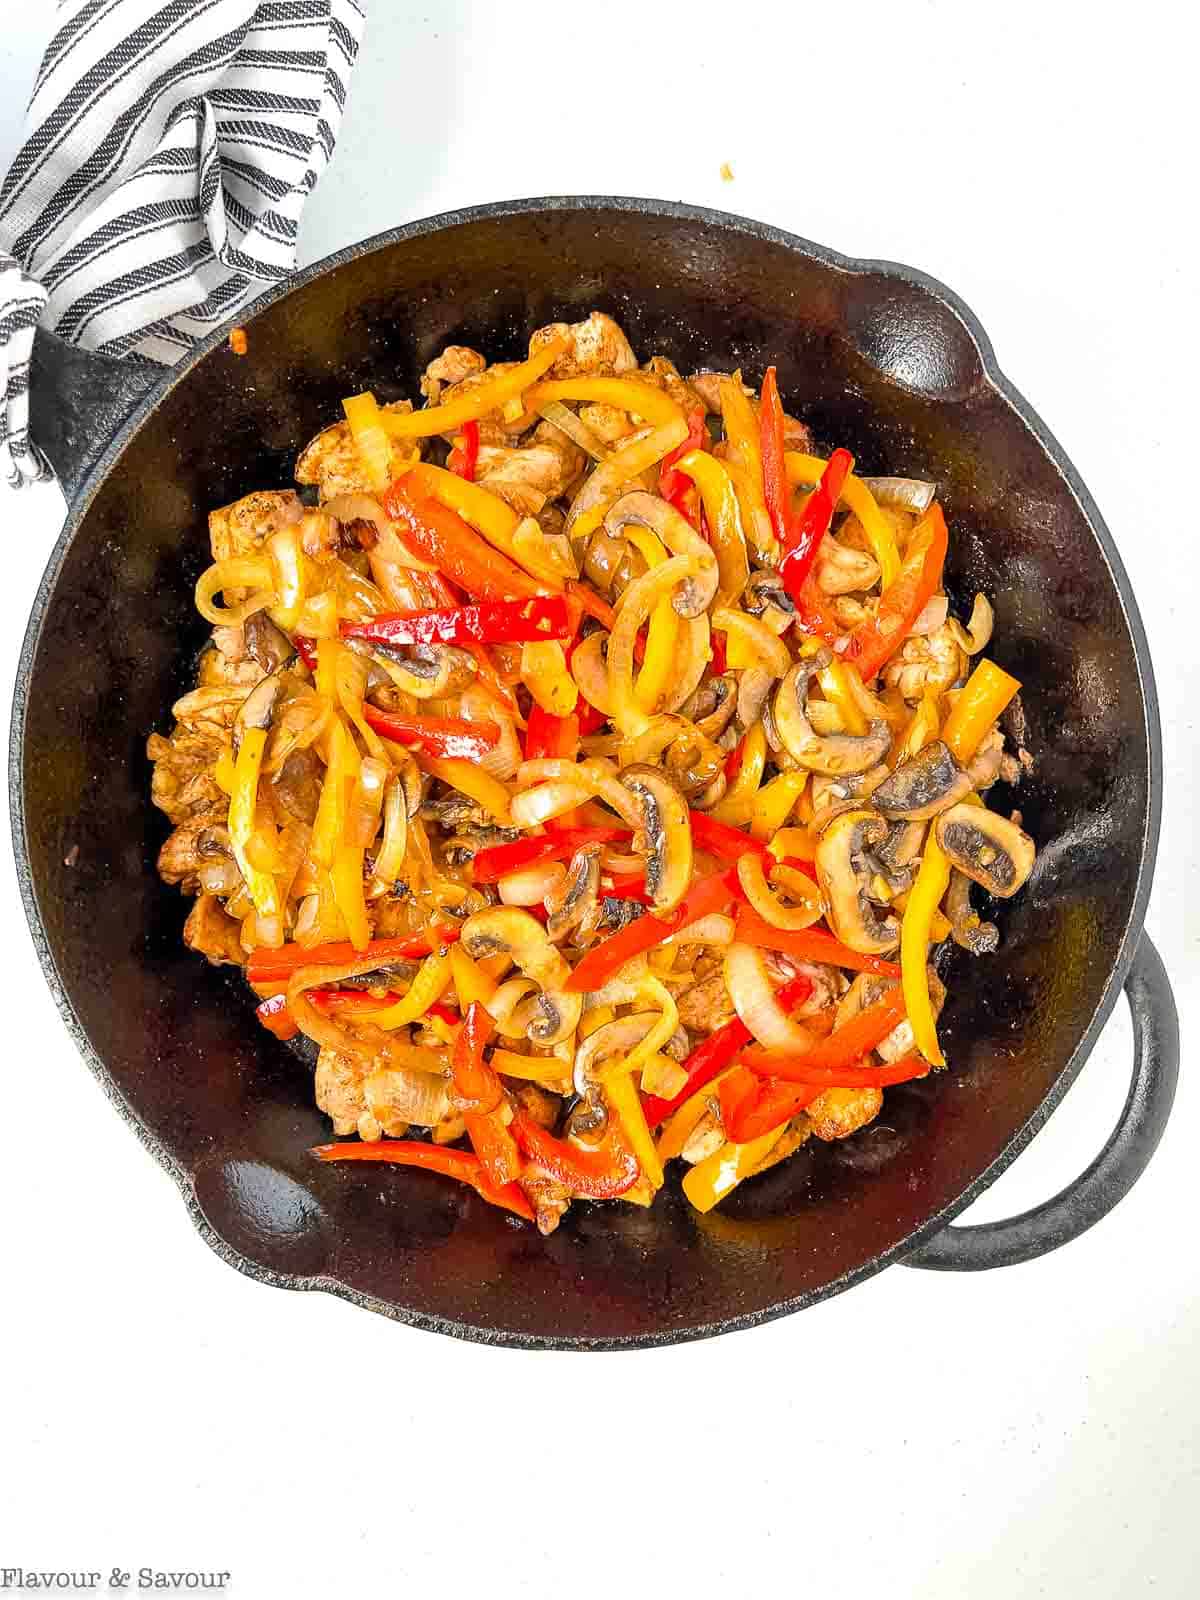 Sautéd peppers and onions on top of browned chicken in a cast iron skillet.